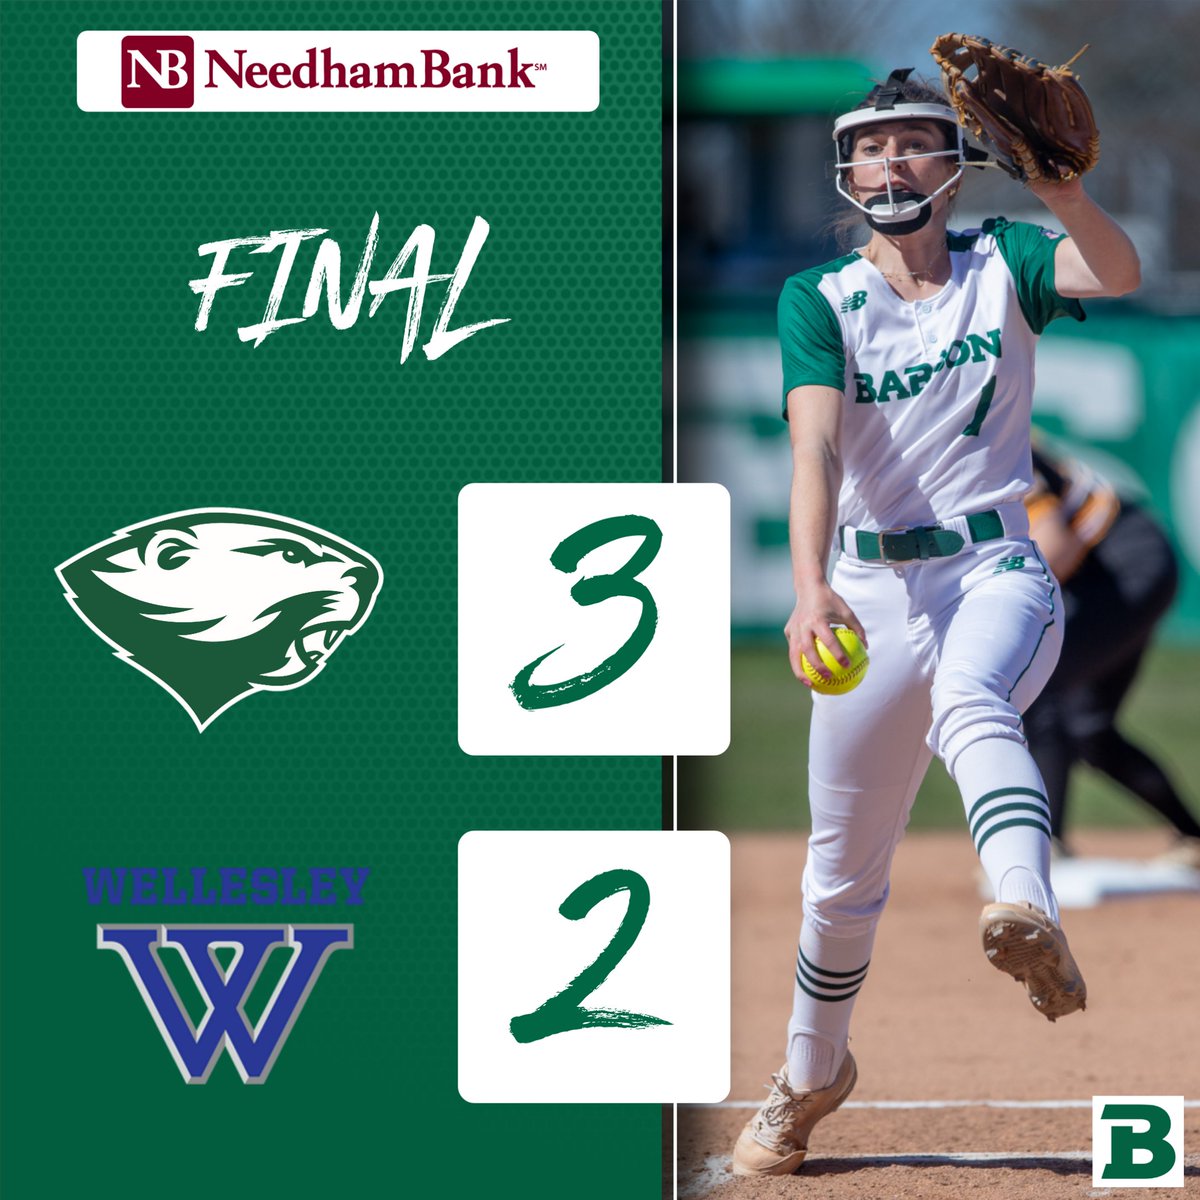 Athena Hadjipanayis drove in a pair of runs and Katie Vlacich gave up two runs over 7.0 innings to help @babsonsoftball finish off a sweep of @WellesleyBlue with a 3-2 win in game two on Friday. #GoBabo #d3sb